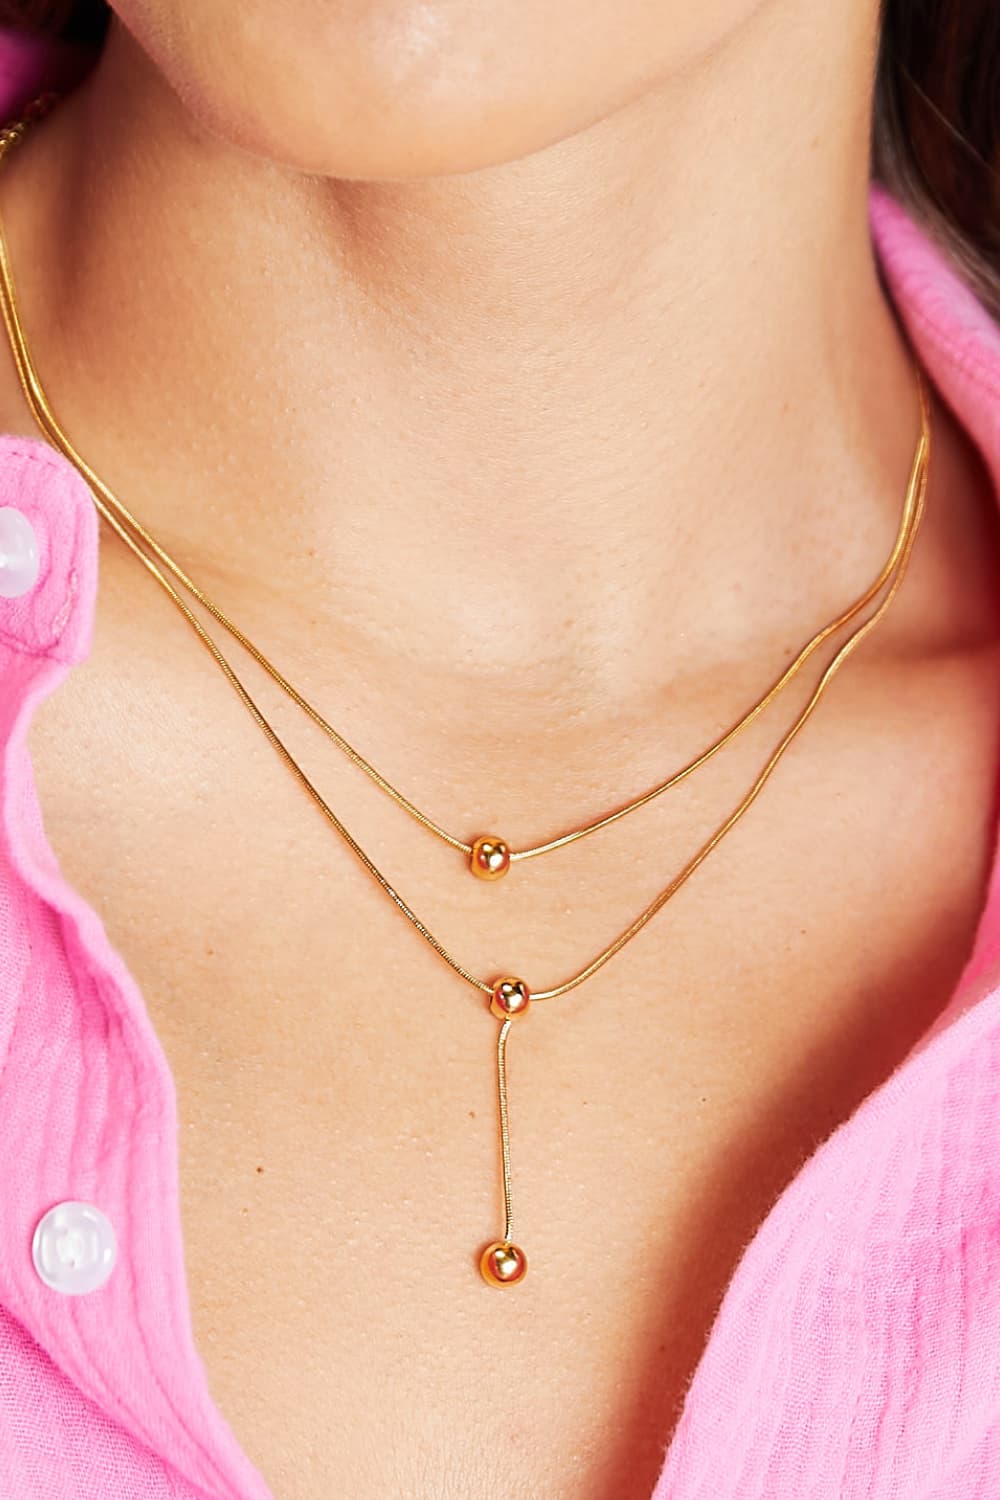 Drop Ball Double-Layered Necklace - Global Village Kailua Boutique